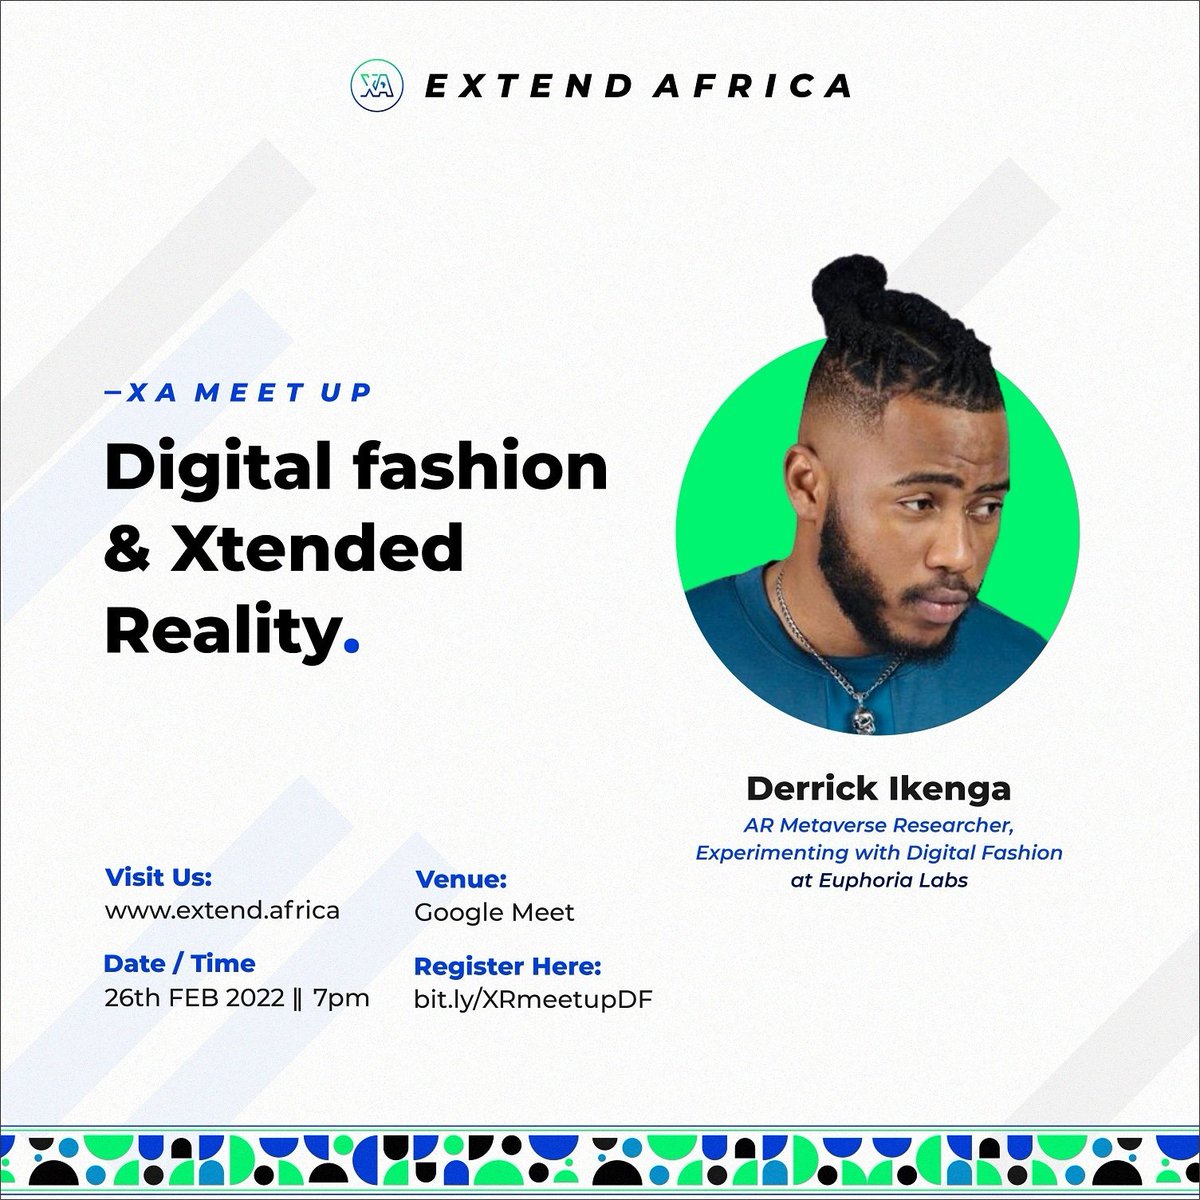 Join us today at 7:00 PM as we discuss DIGITAL FASHION AND XR

Meeting link: meet.google.com/bwy-hvcx-dfb
#virtualtryon #AugmentedReality #virtualreality #Metaverse #DigitalFashion @_echo3D_ @ARVRAfrica @software_artist
Please retweet and share.
SEE YOU THERE